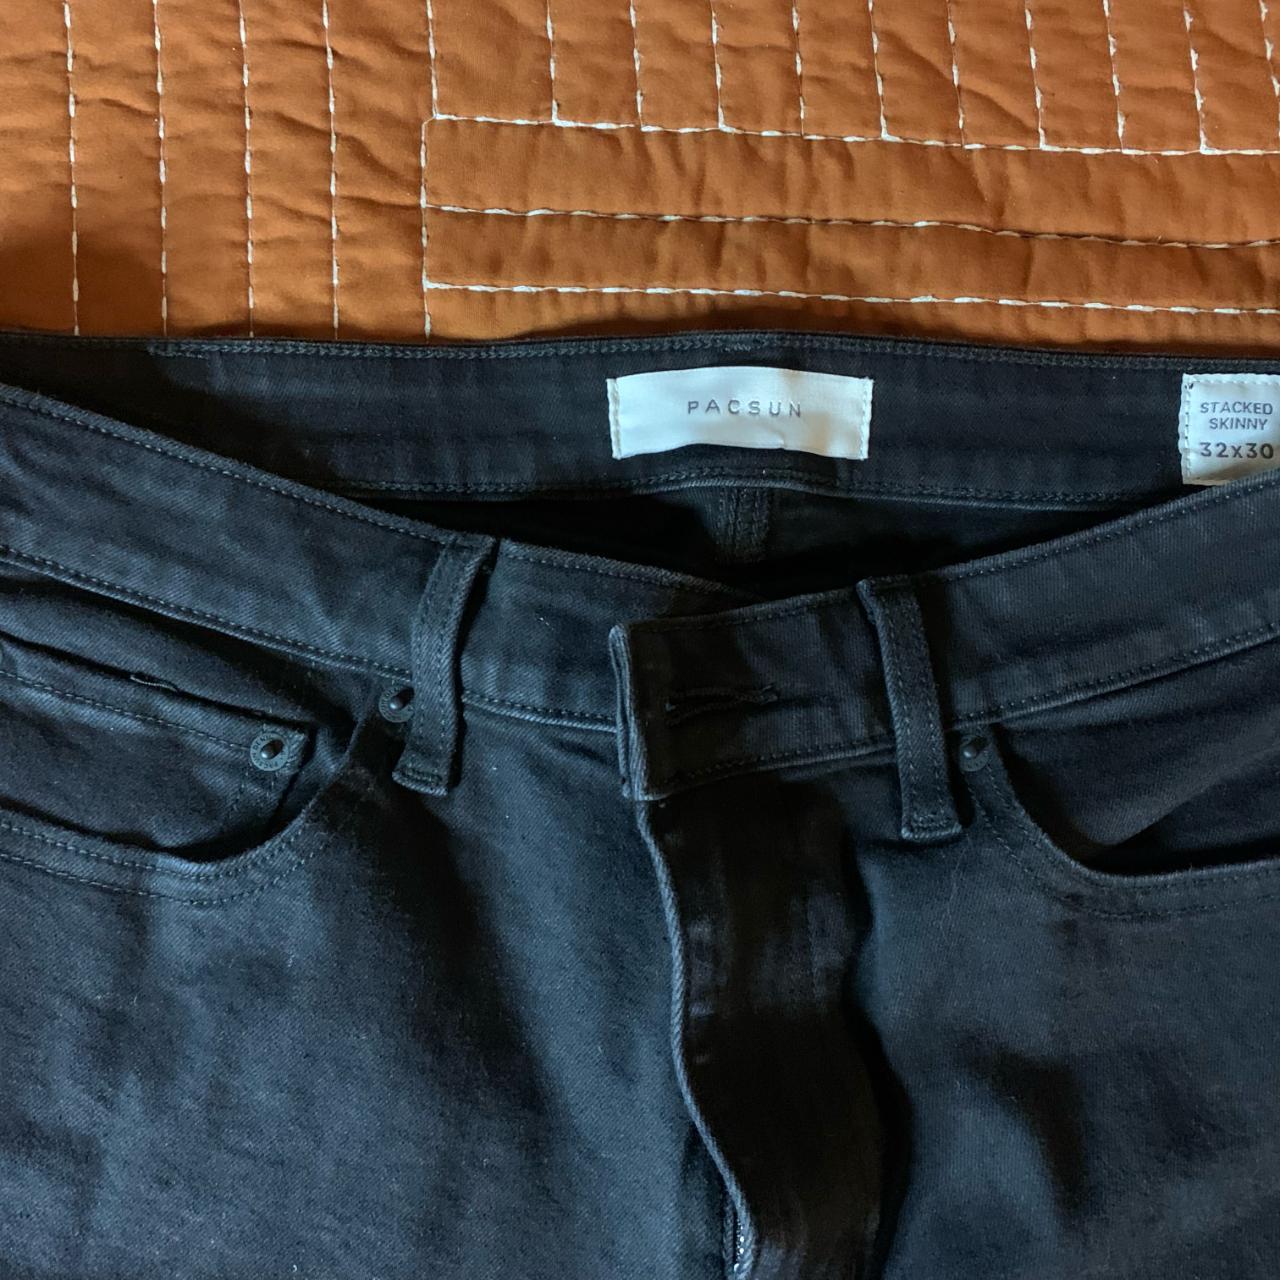 NWT Pacsun Stacked Skinny Black Jeans 28x30 - Jeans